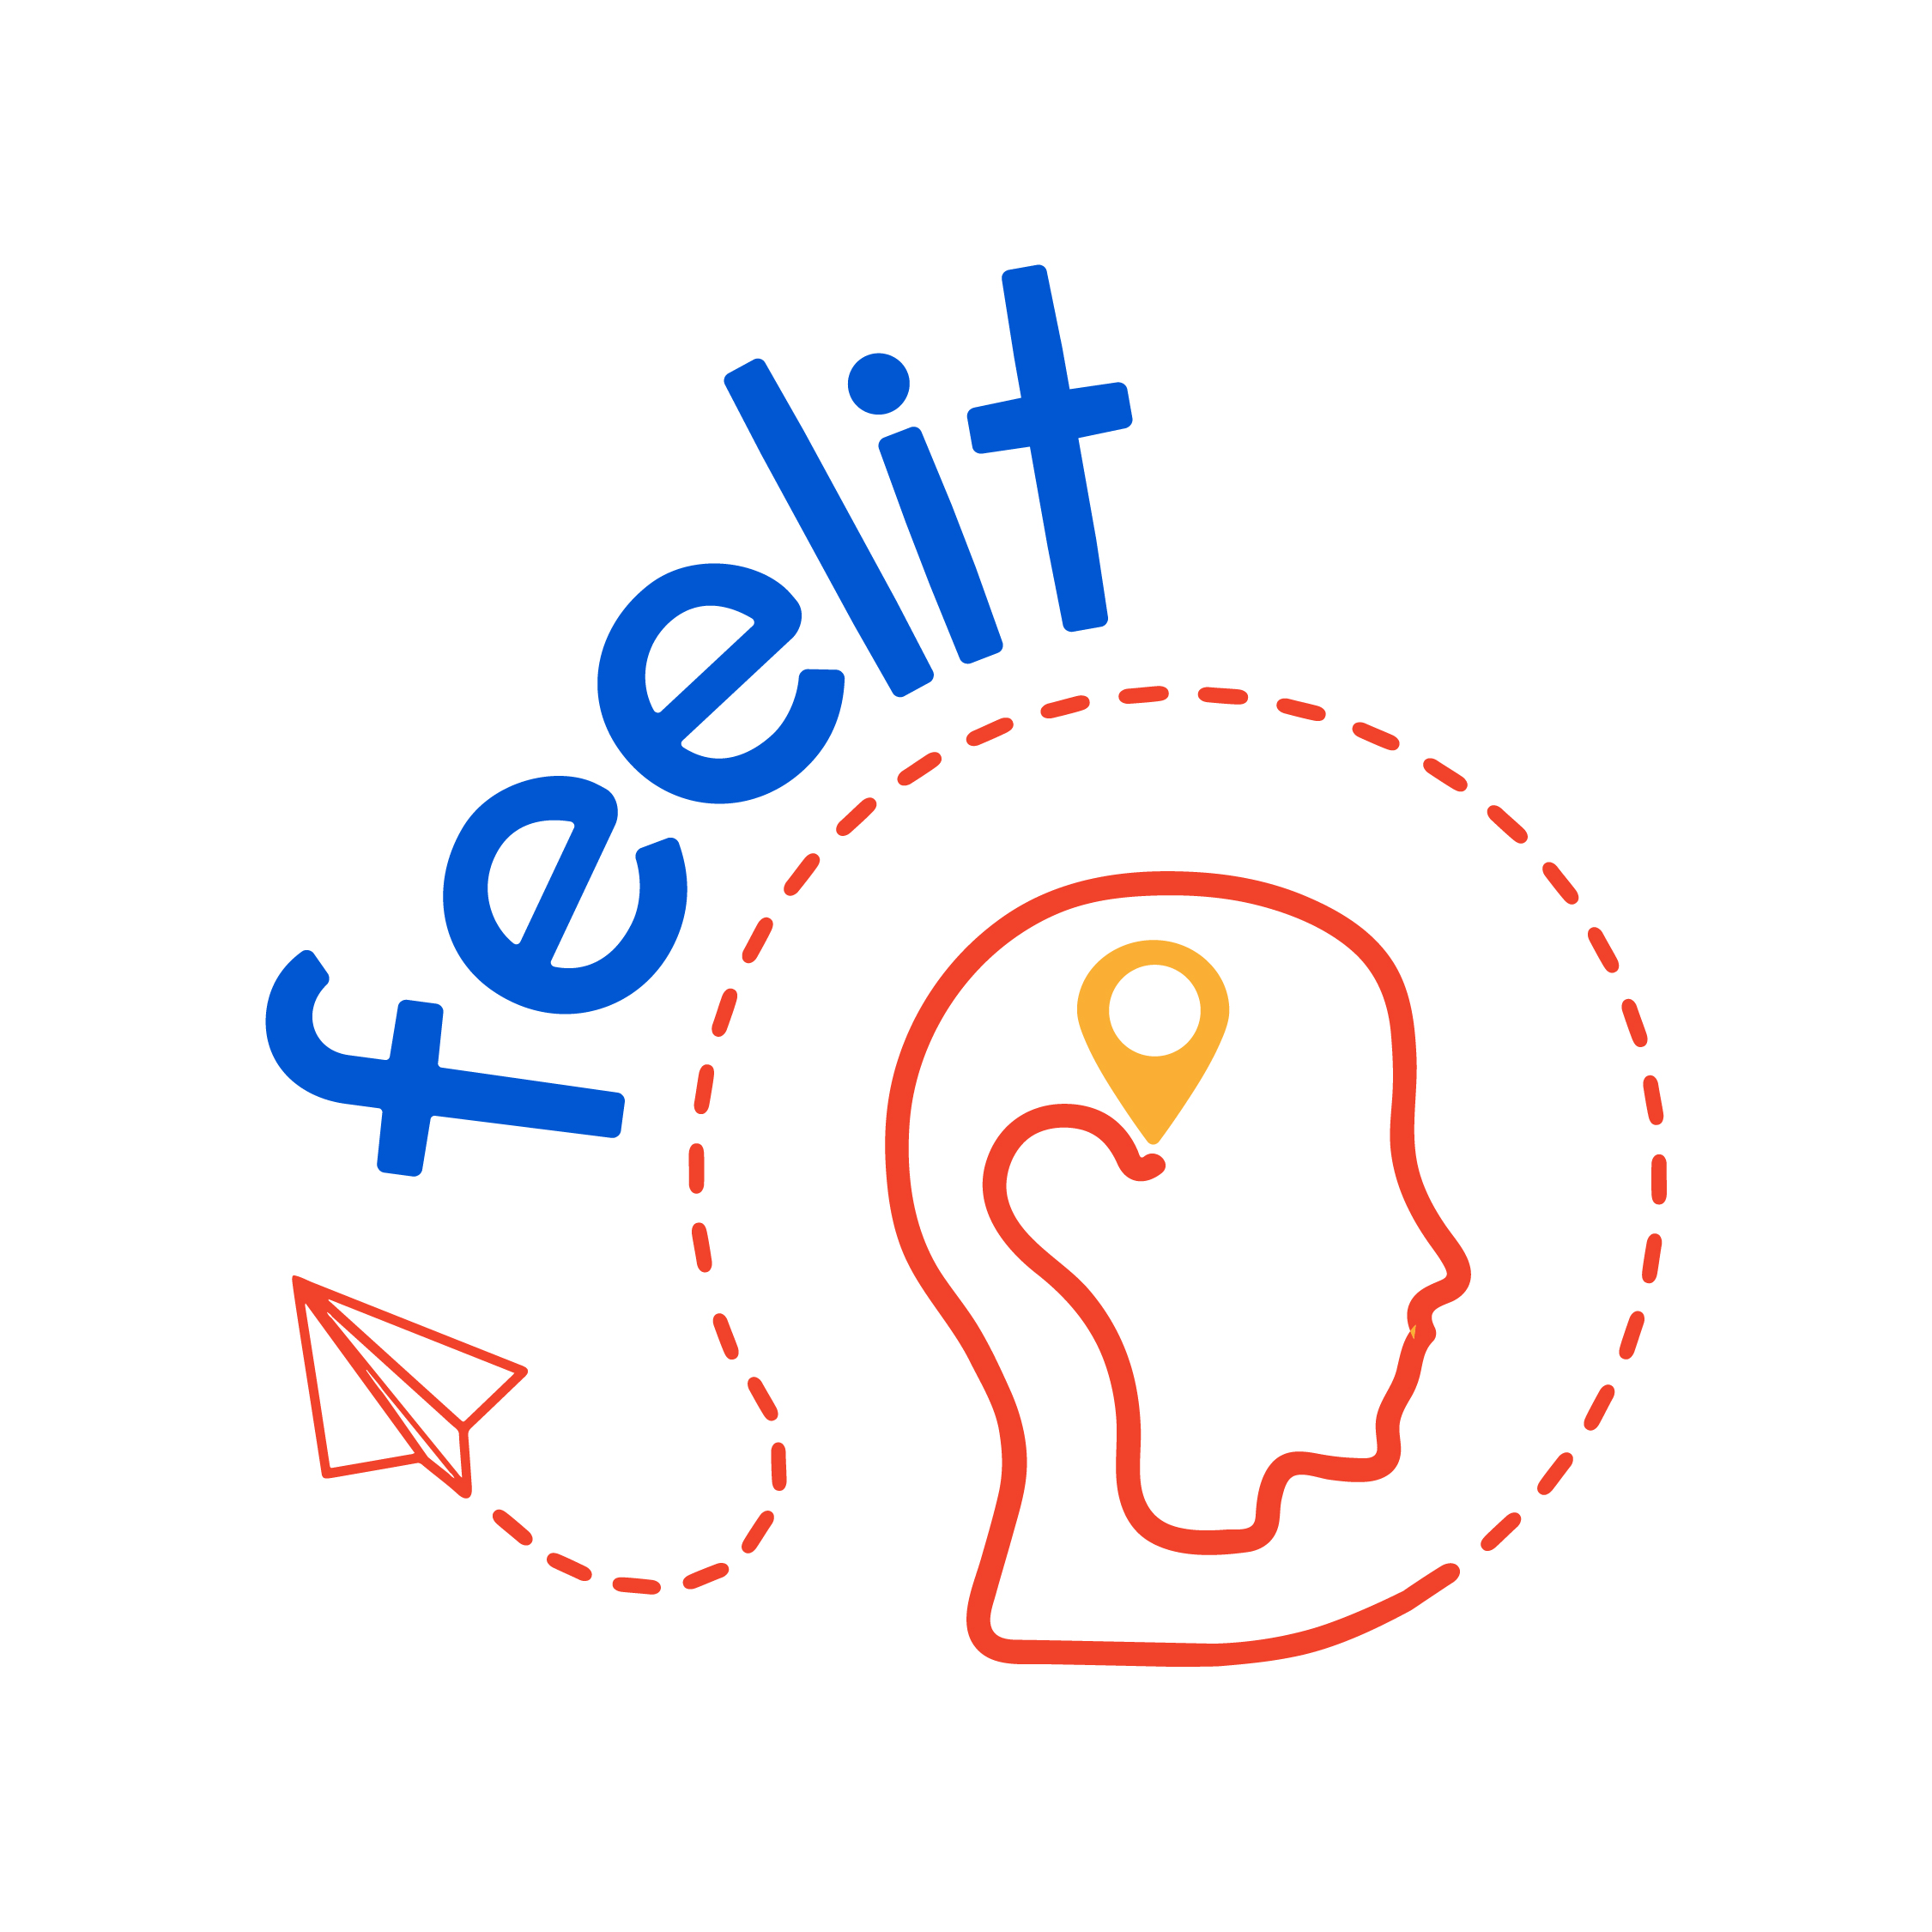 logo of feelit project with line drawing of human head in side profile, map marker over the ear, paper aeroplane and feelit text 